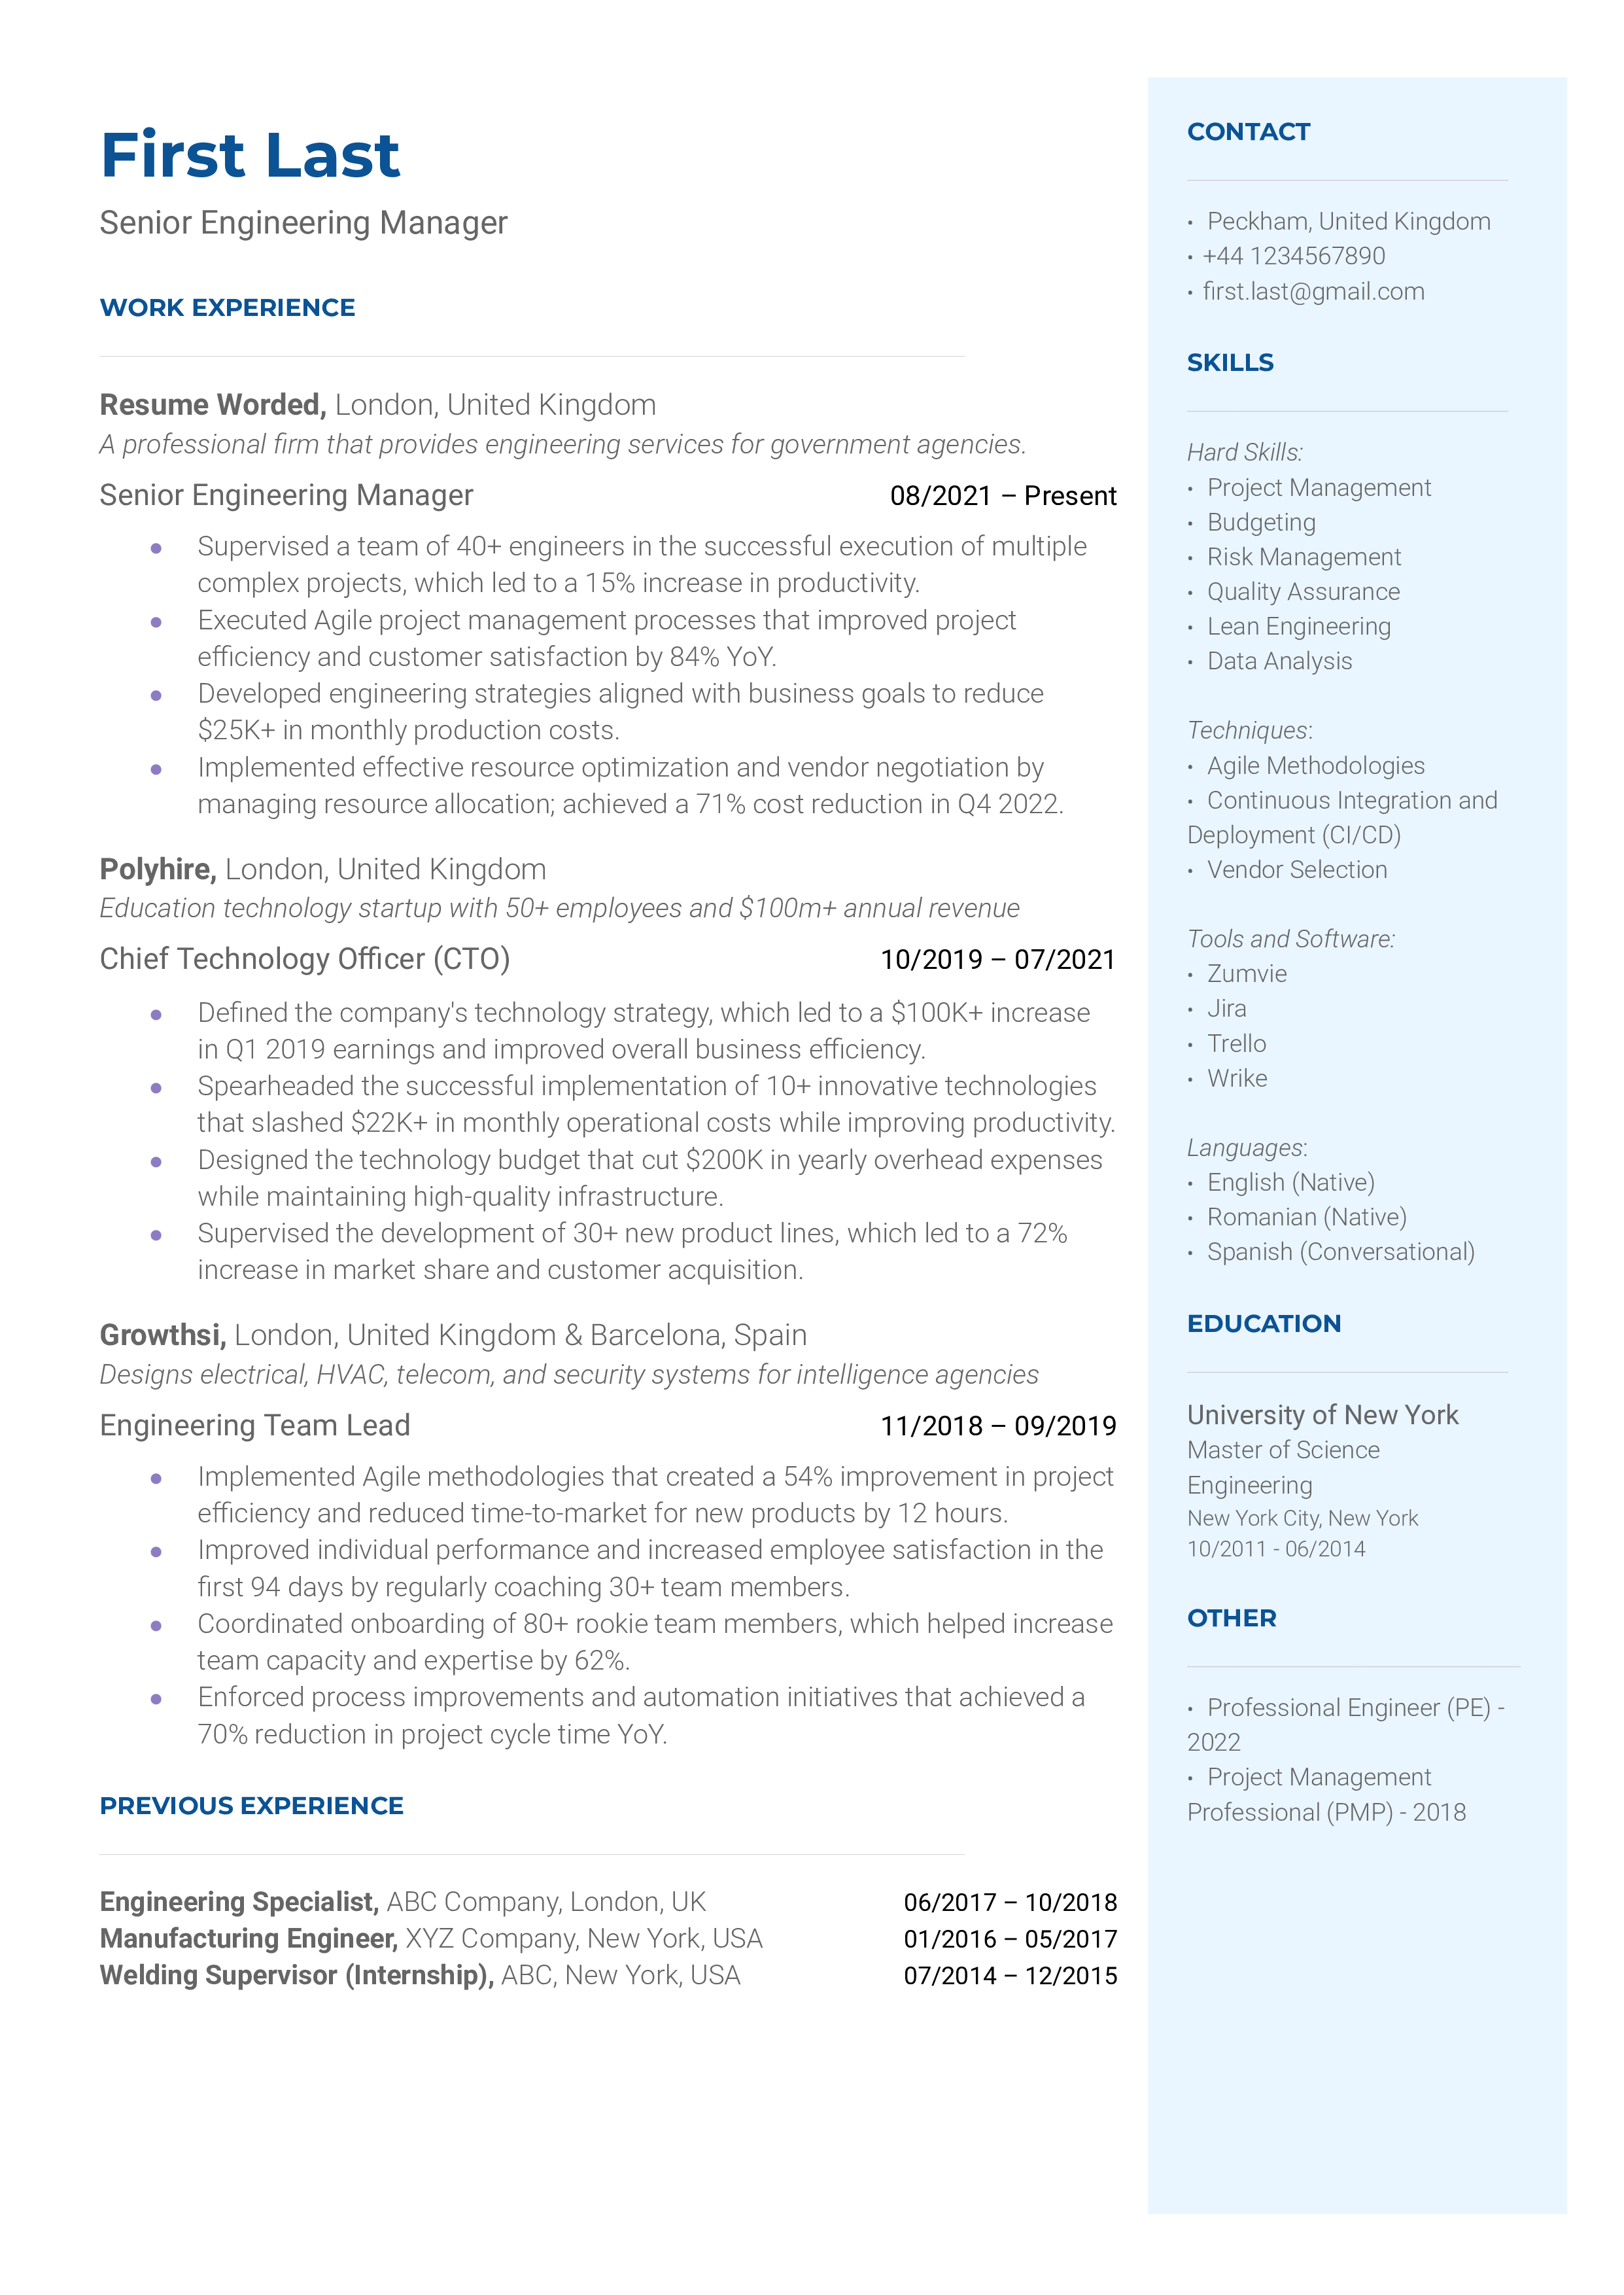 Senior Engineering Manager's CV showcasing leadership and technical expertise.